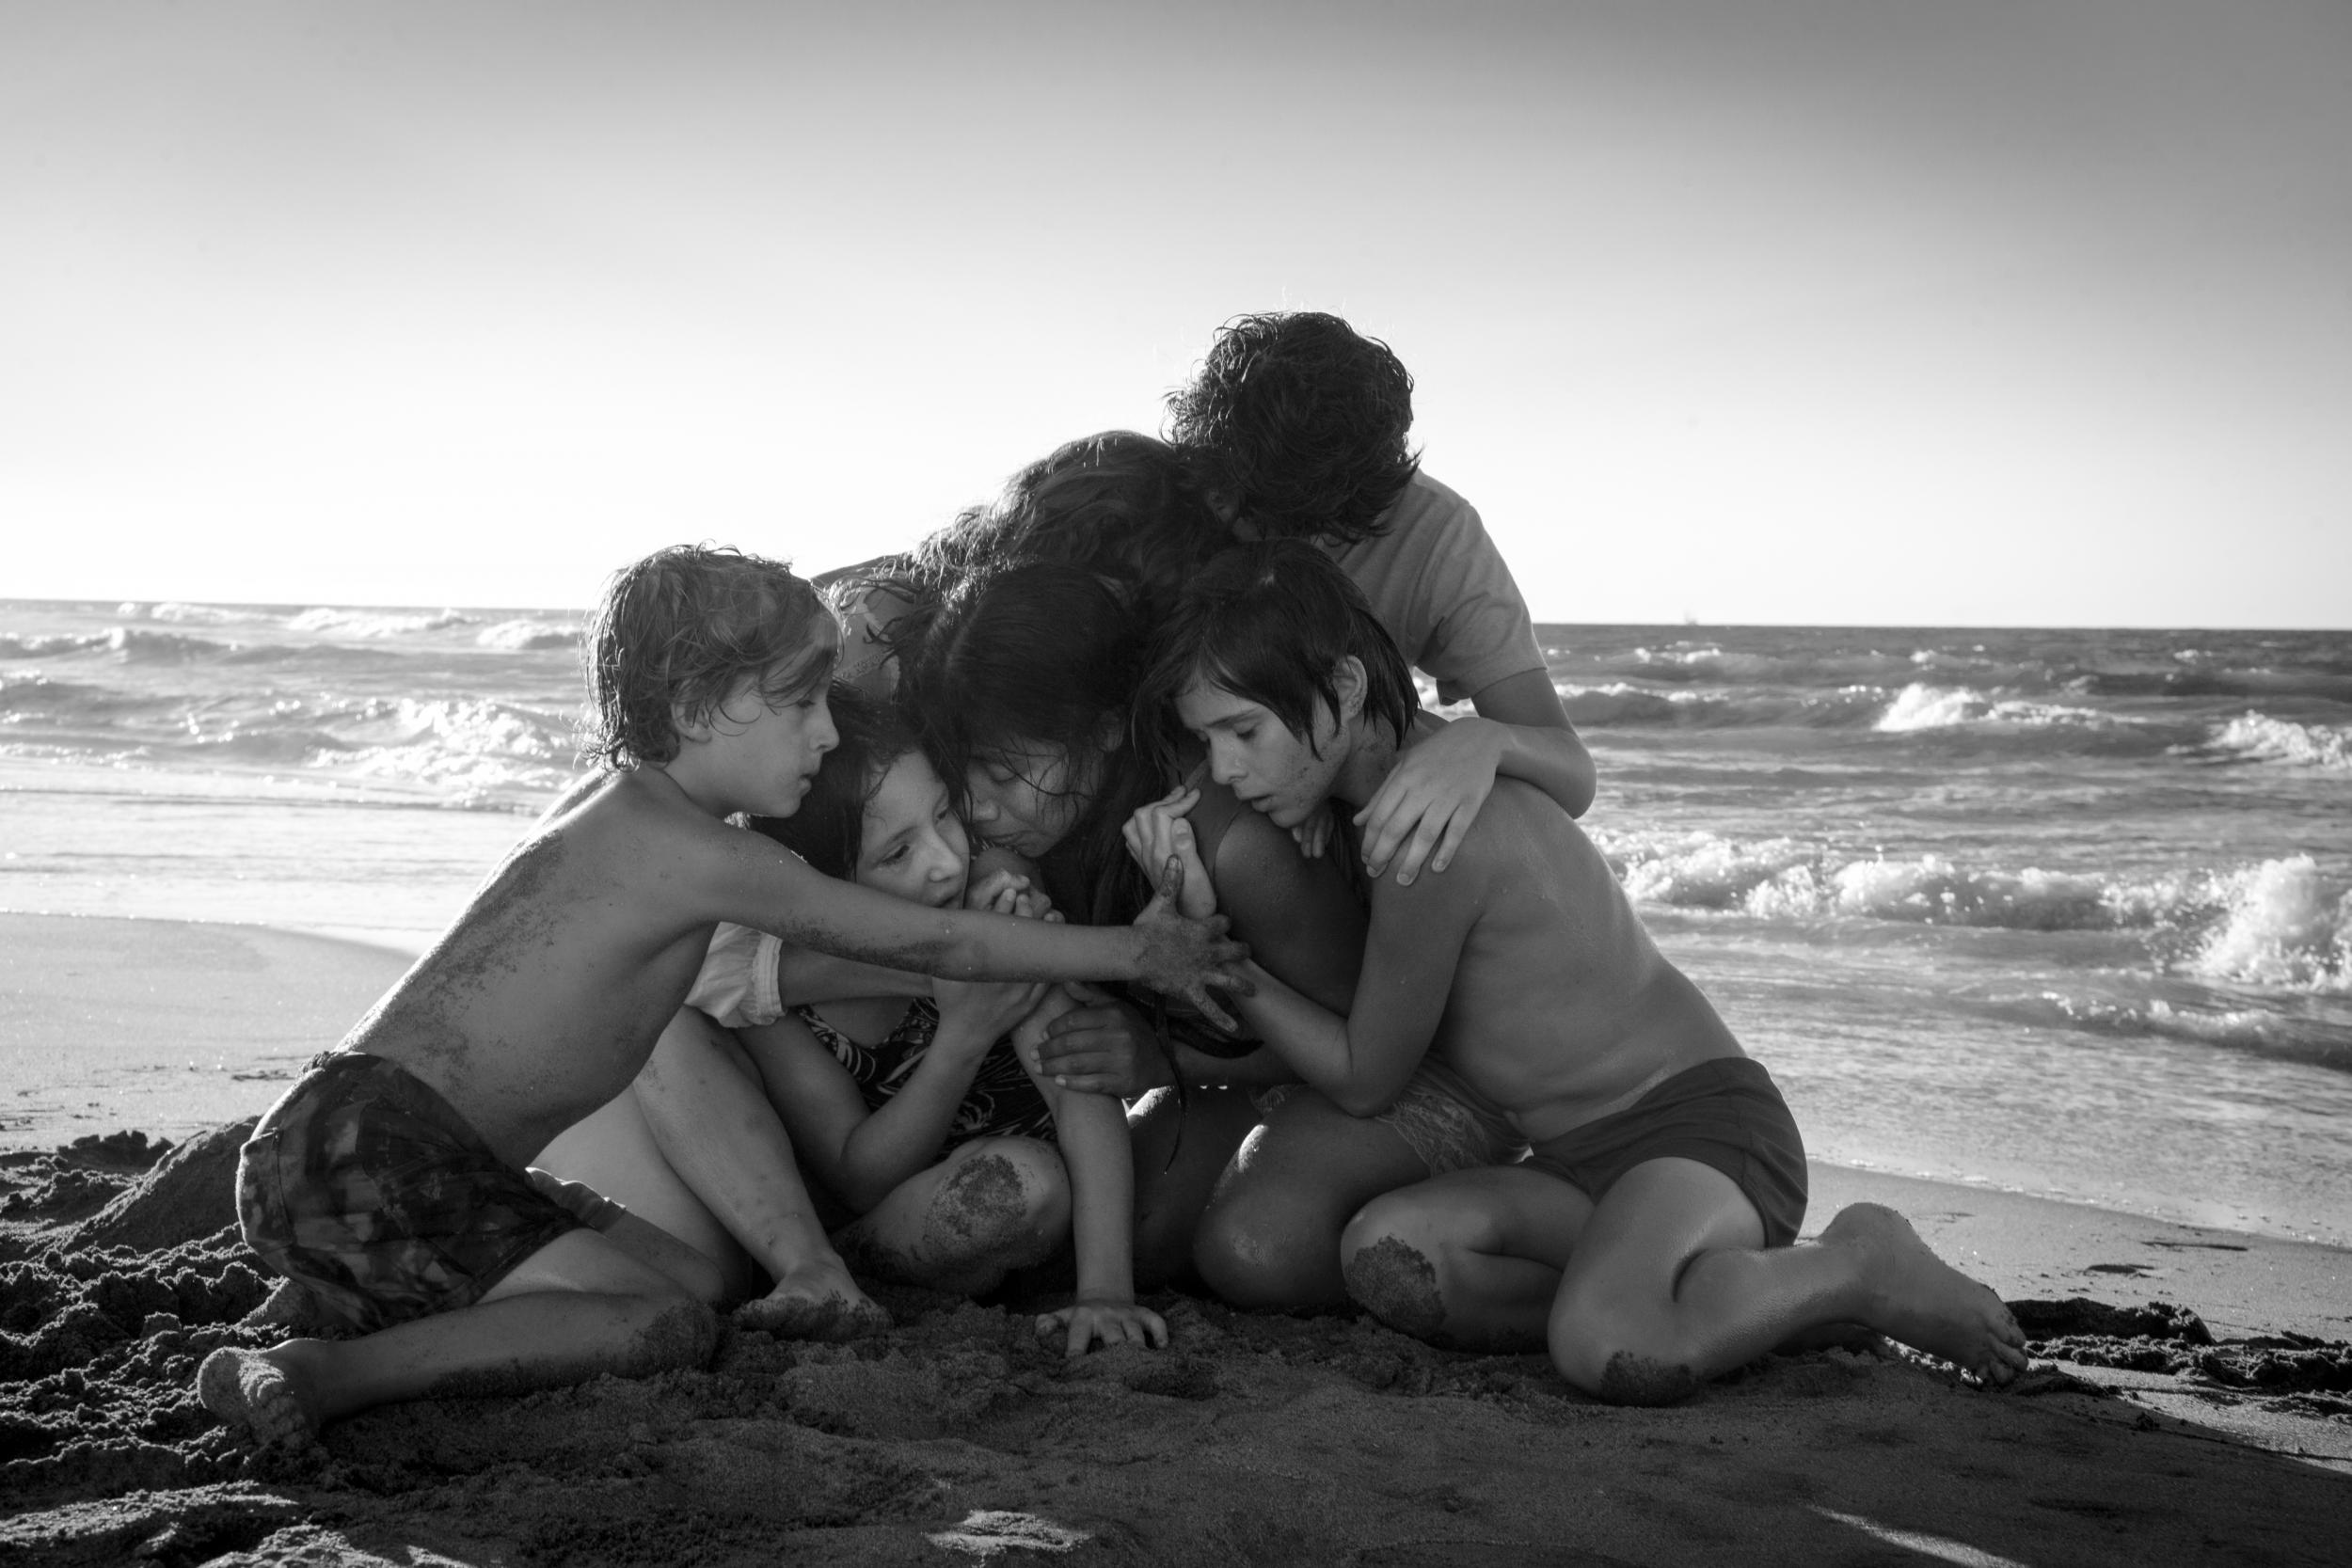 Best Motion Picture - Foreign Language: Roma